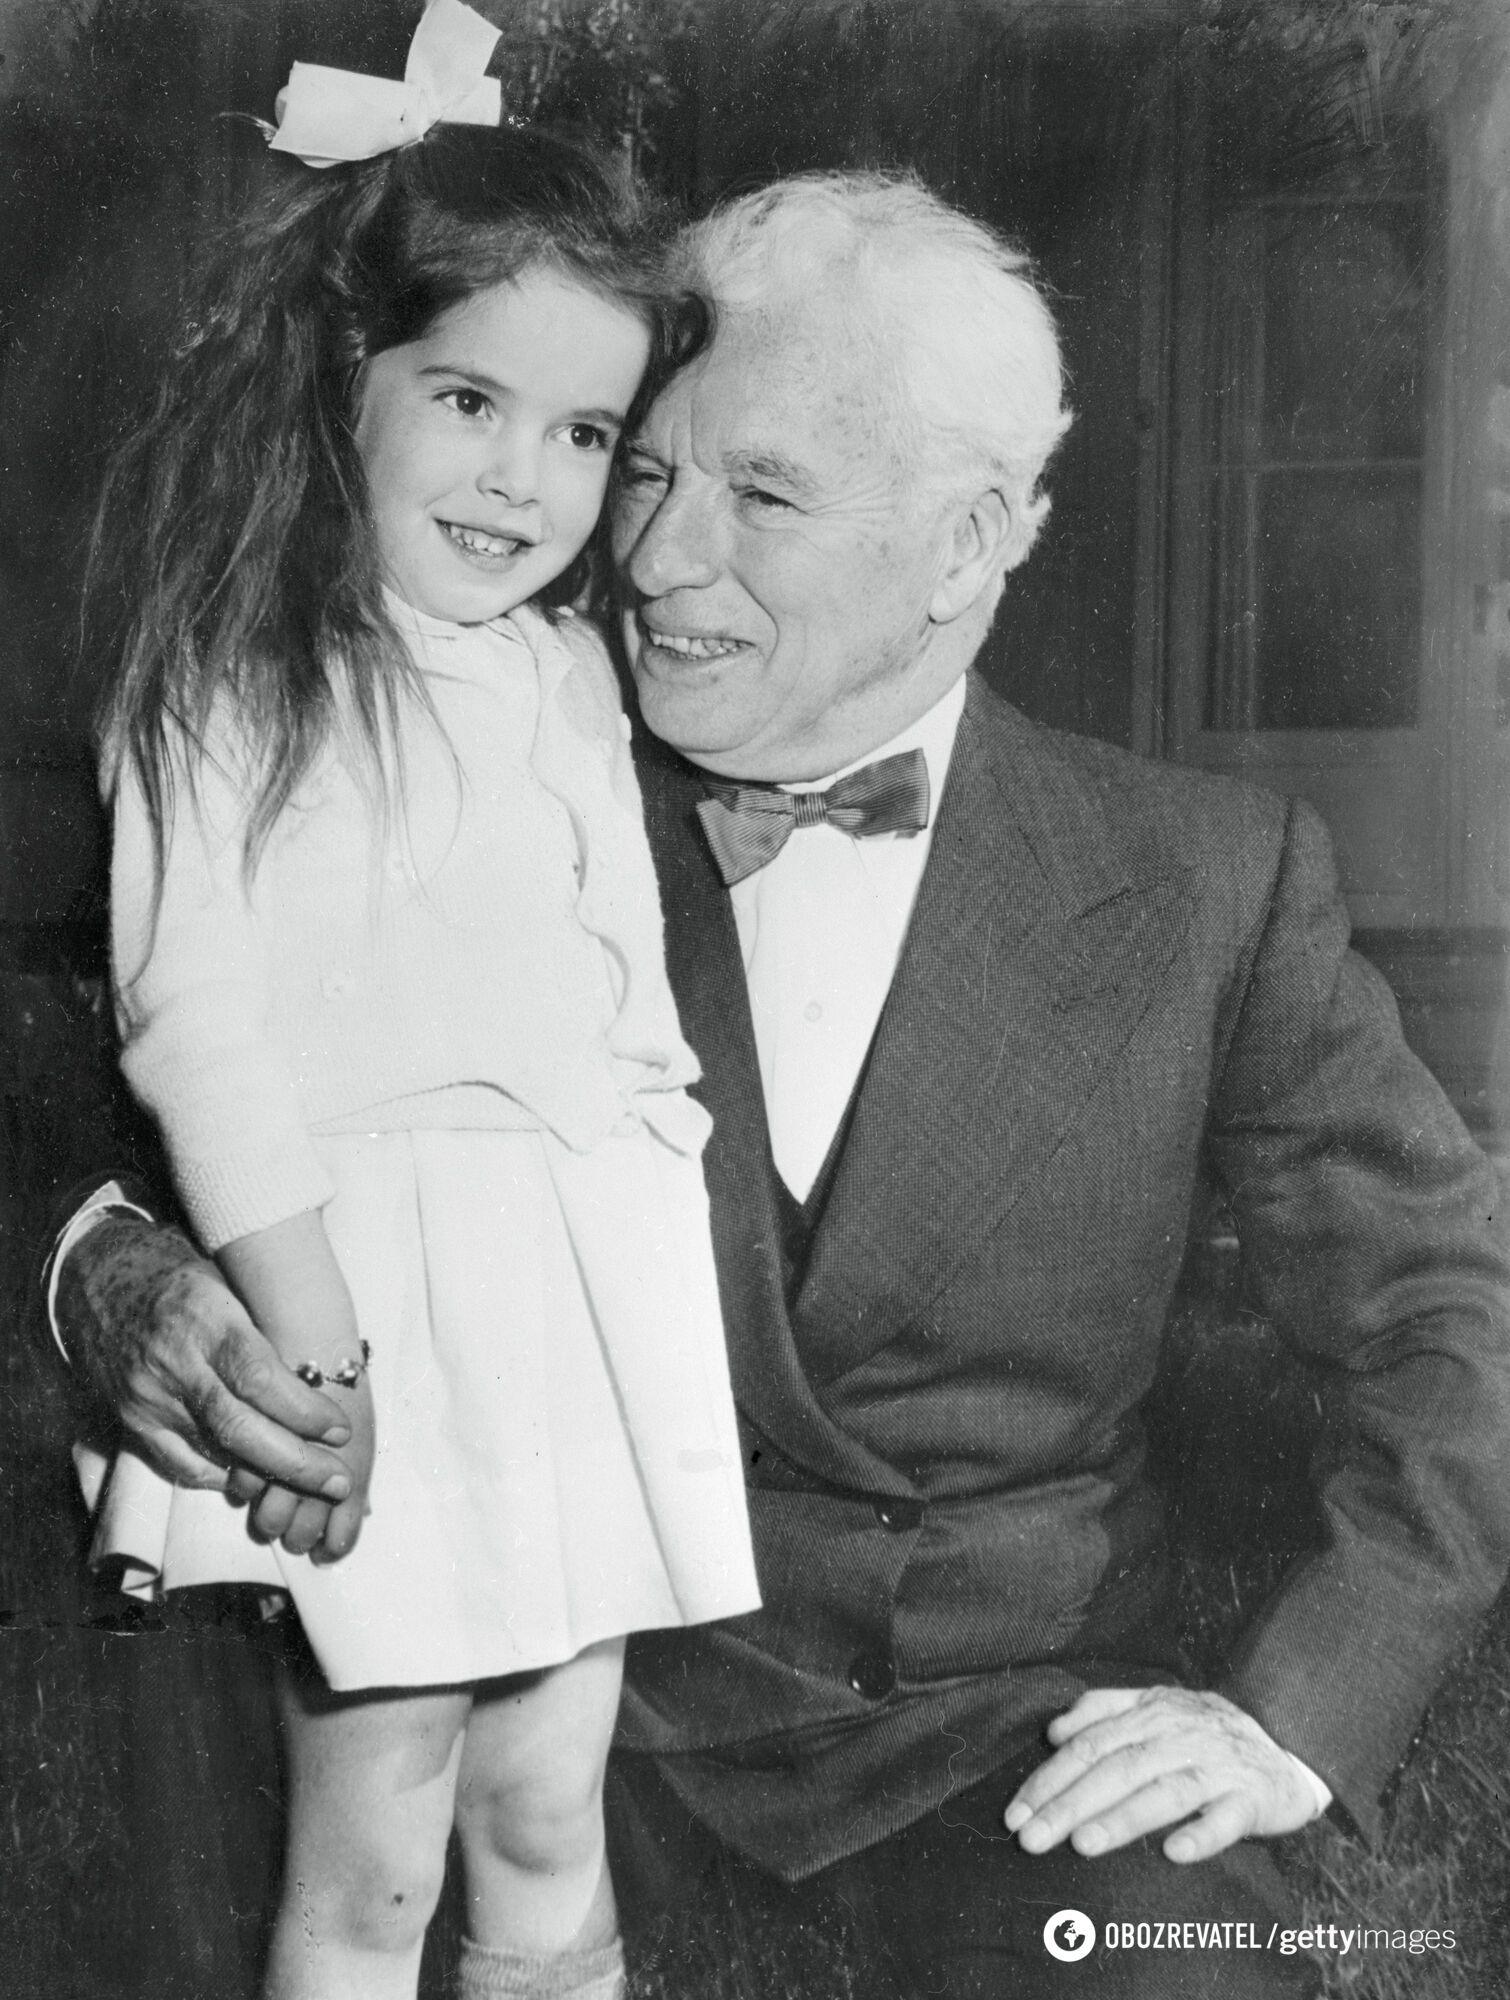 Josephine, the daughter of the legendary Charlie Chaplin, died: what she was famous for